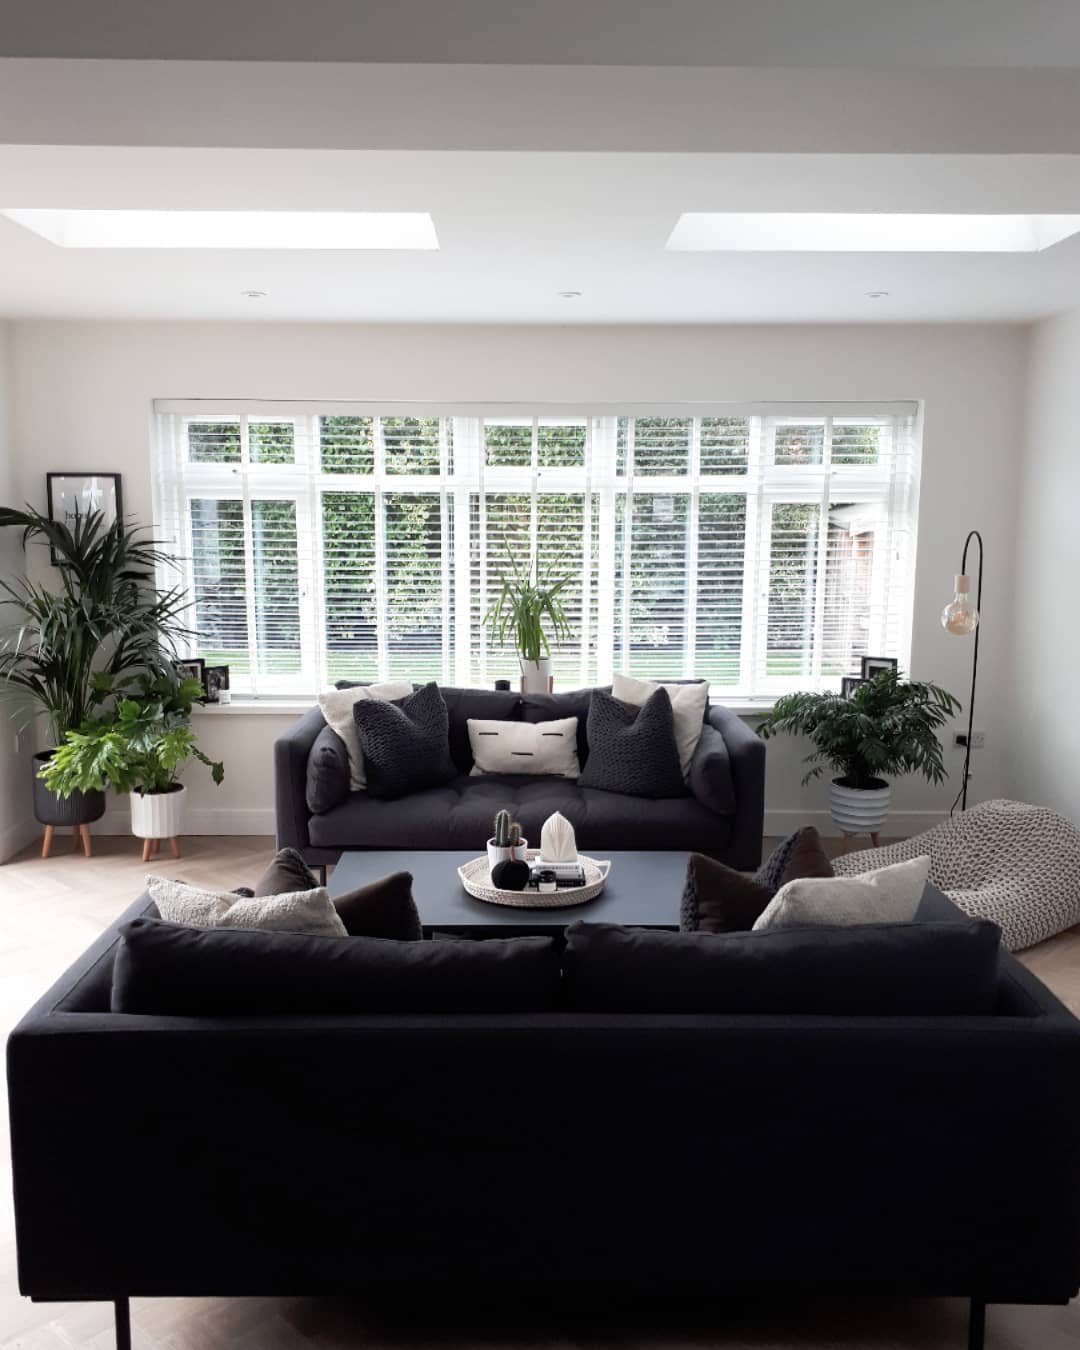 Black Couch in a Bright, Airy Room